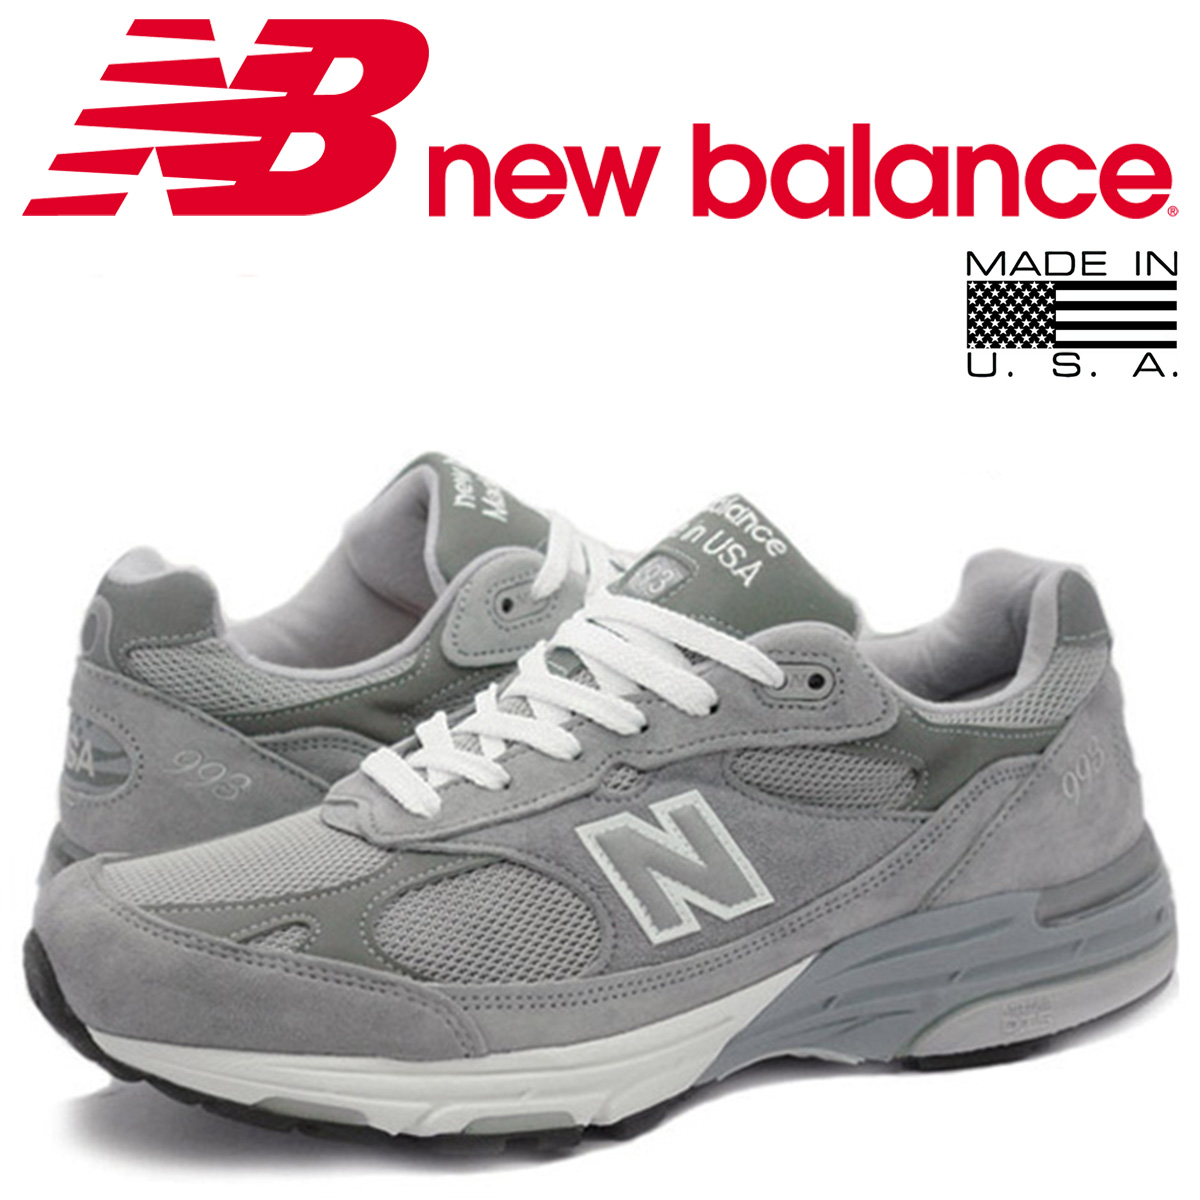 where are new balance shoes made